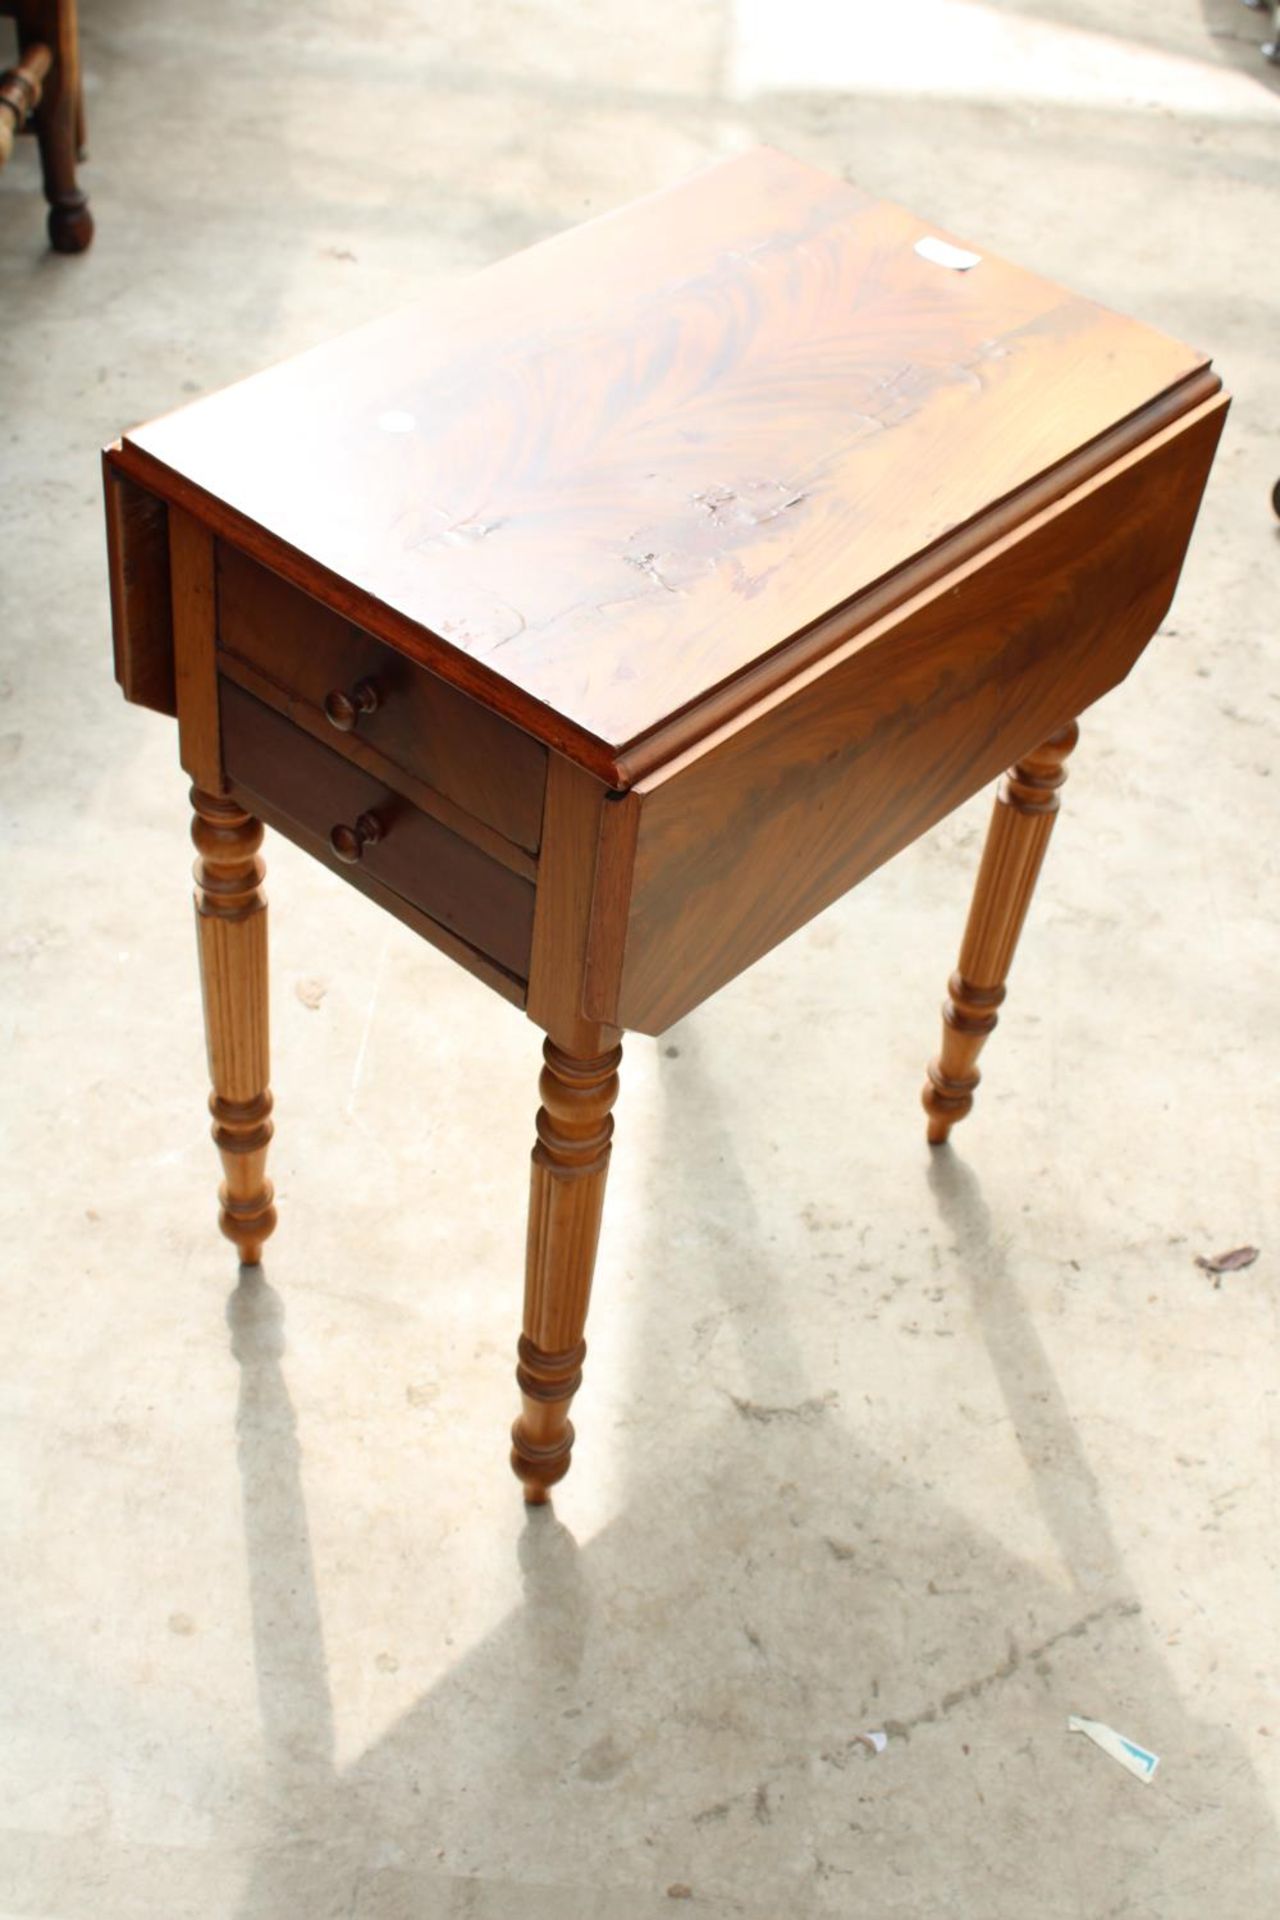 A 19TH CENTURY MAHOGANY WORK TABLE WITH 2 DRAWERS, SIDE CUPBOARD AND WORK BOX - Image 2 of 5